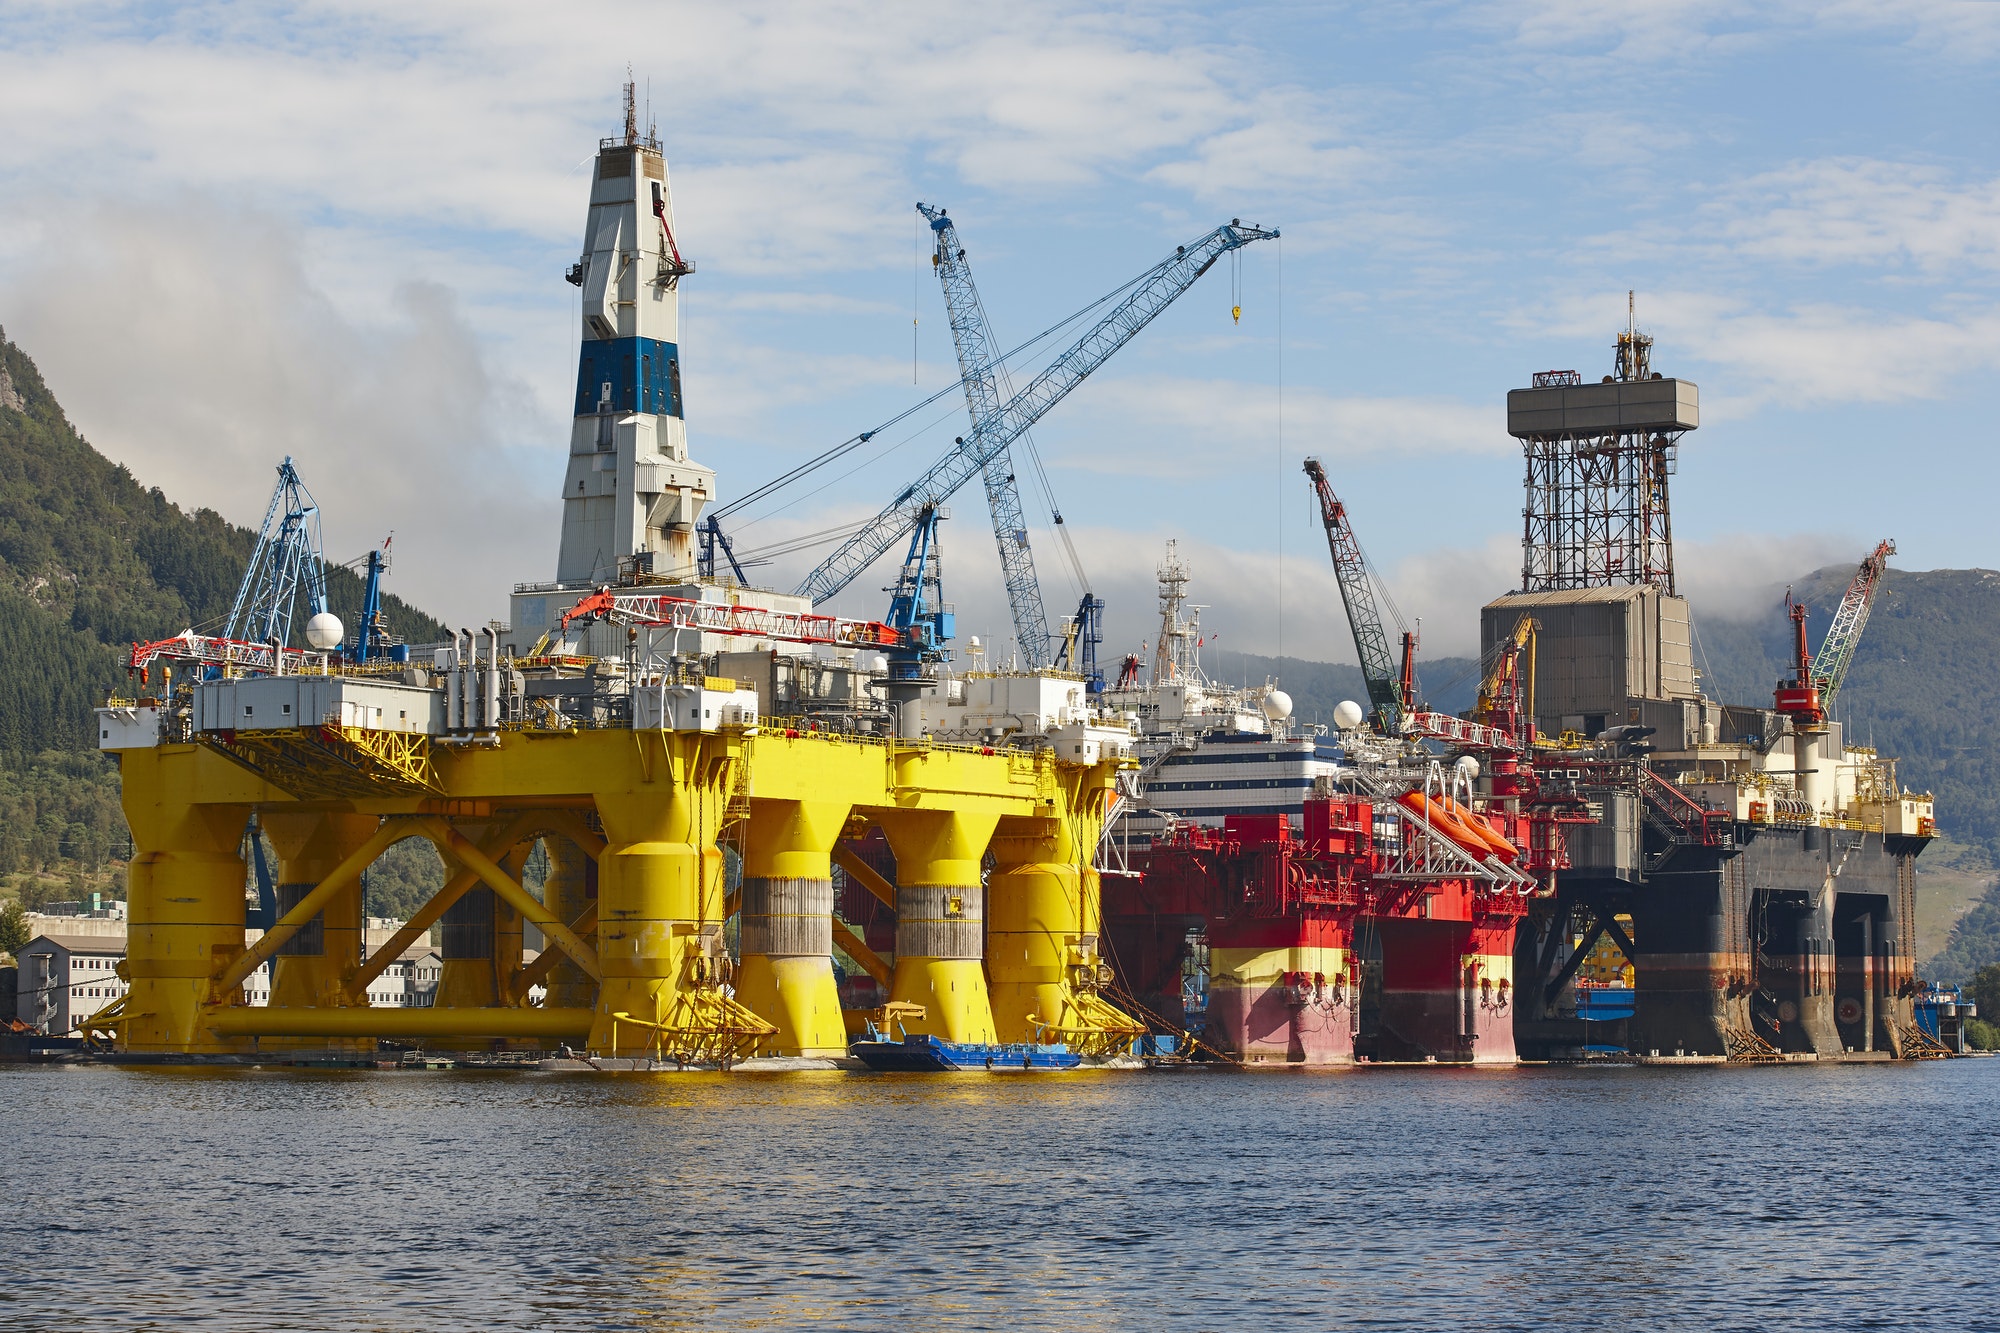 Oil and gas platform in Norway. Energy industry. Petroleum exploration